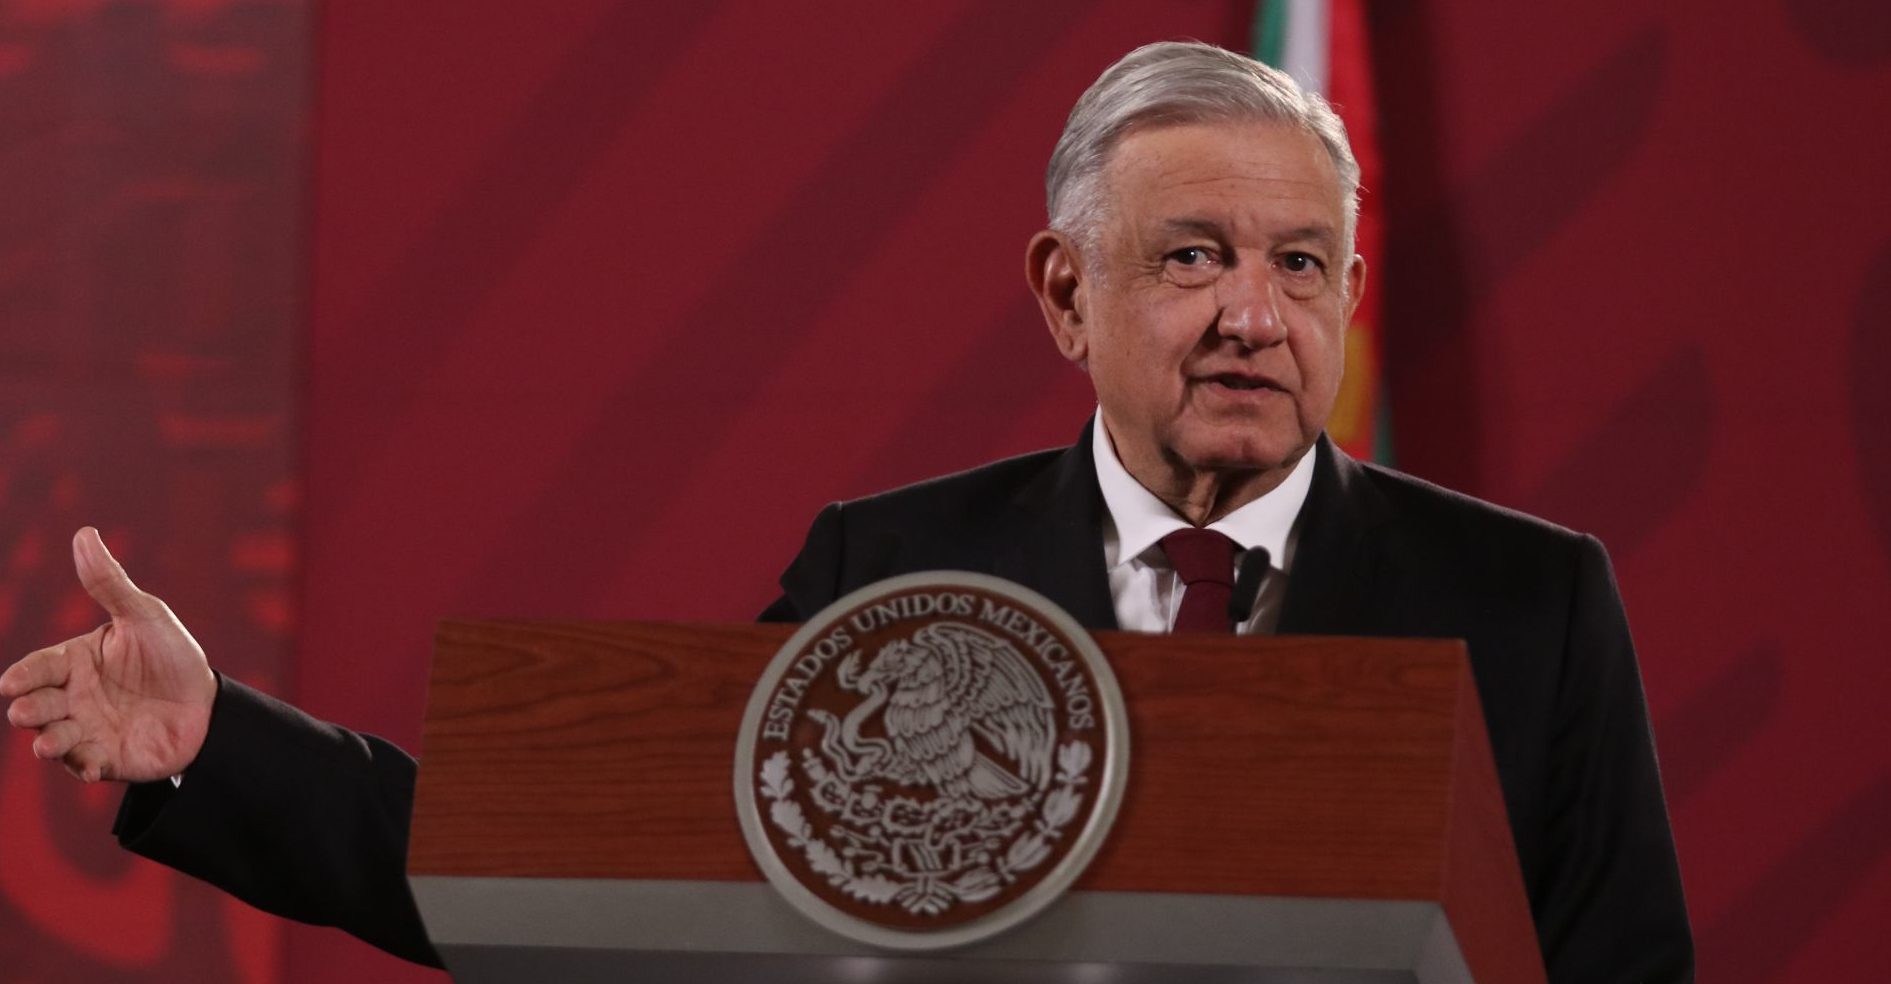 Calderón is not persecuted politician, and Garcia Luna's case is a matter for US: AMLO